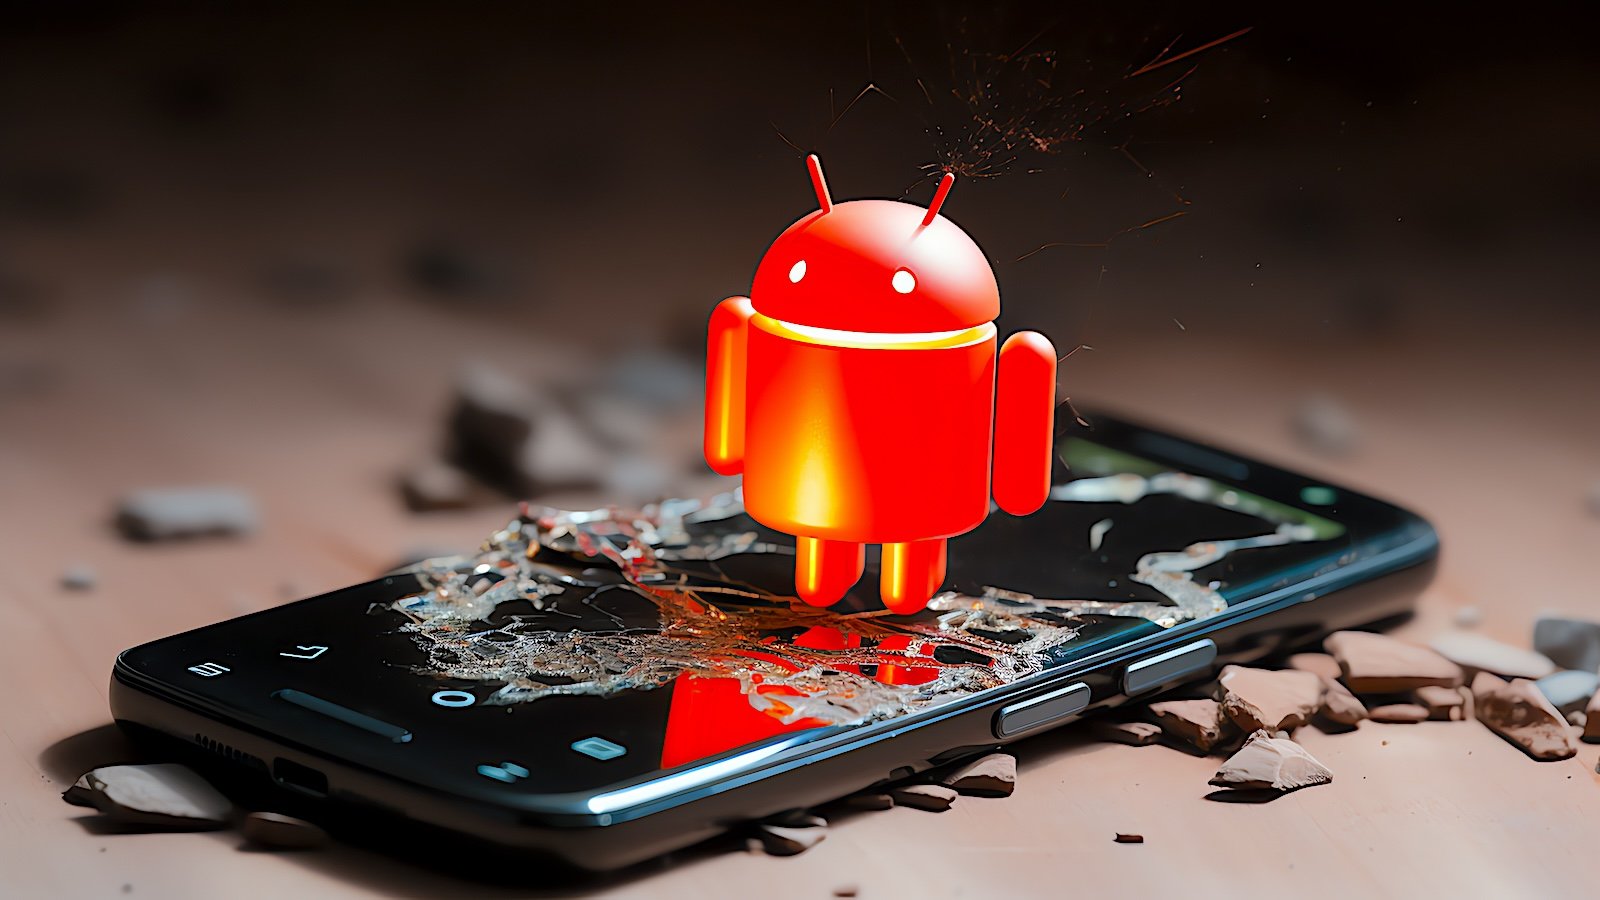 SpyLoan Android malware on Google Play downloaded 12 million times